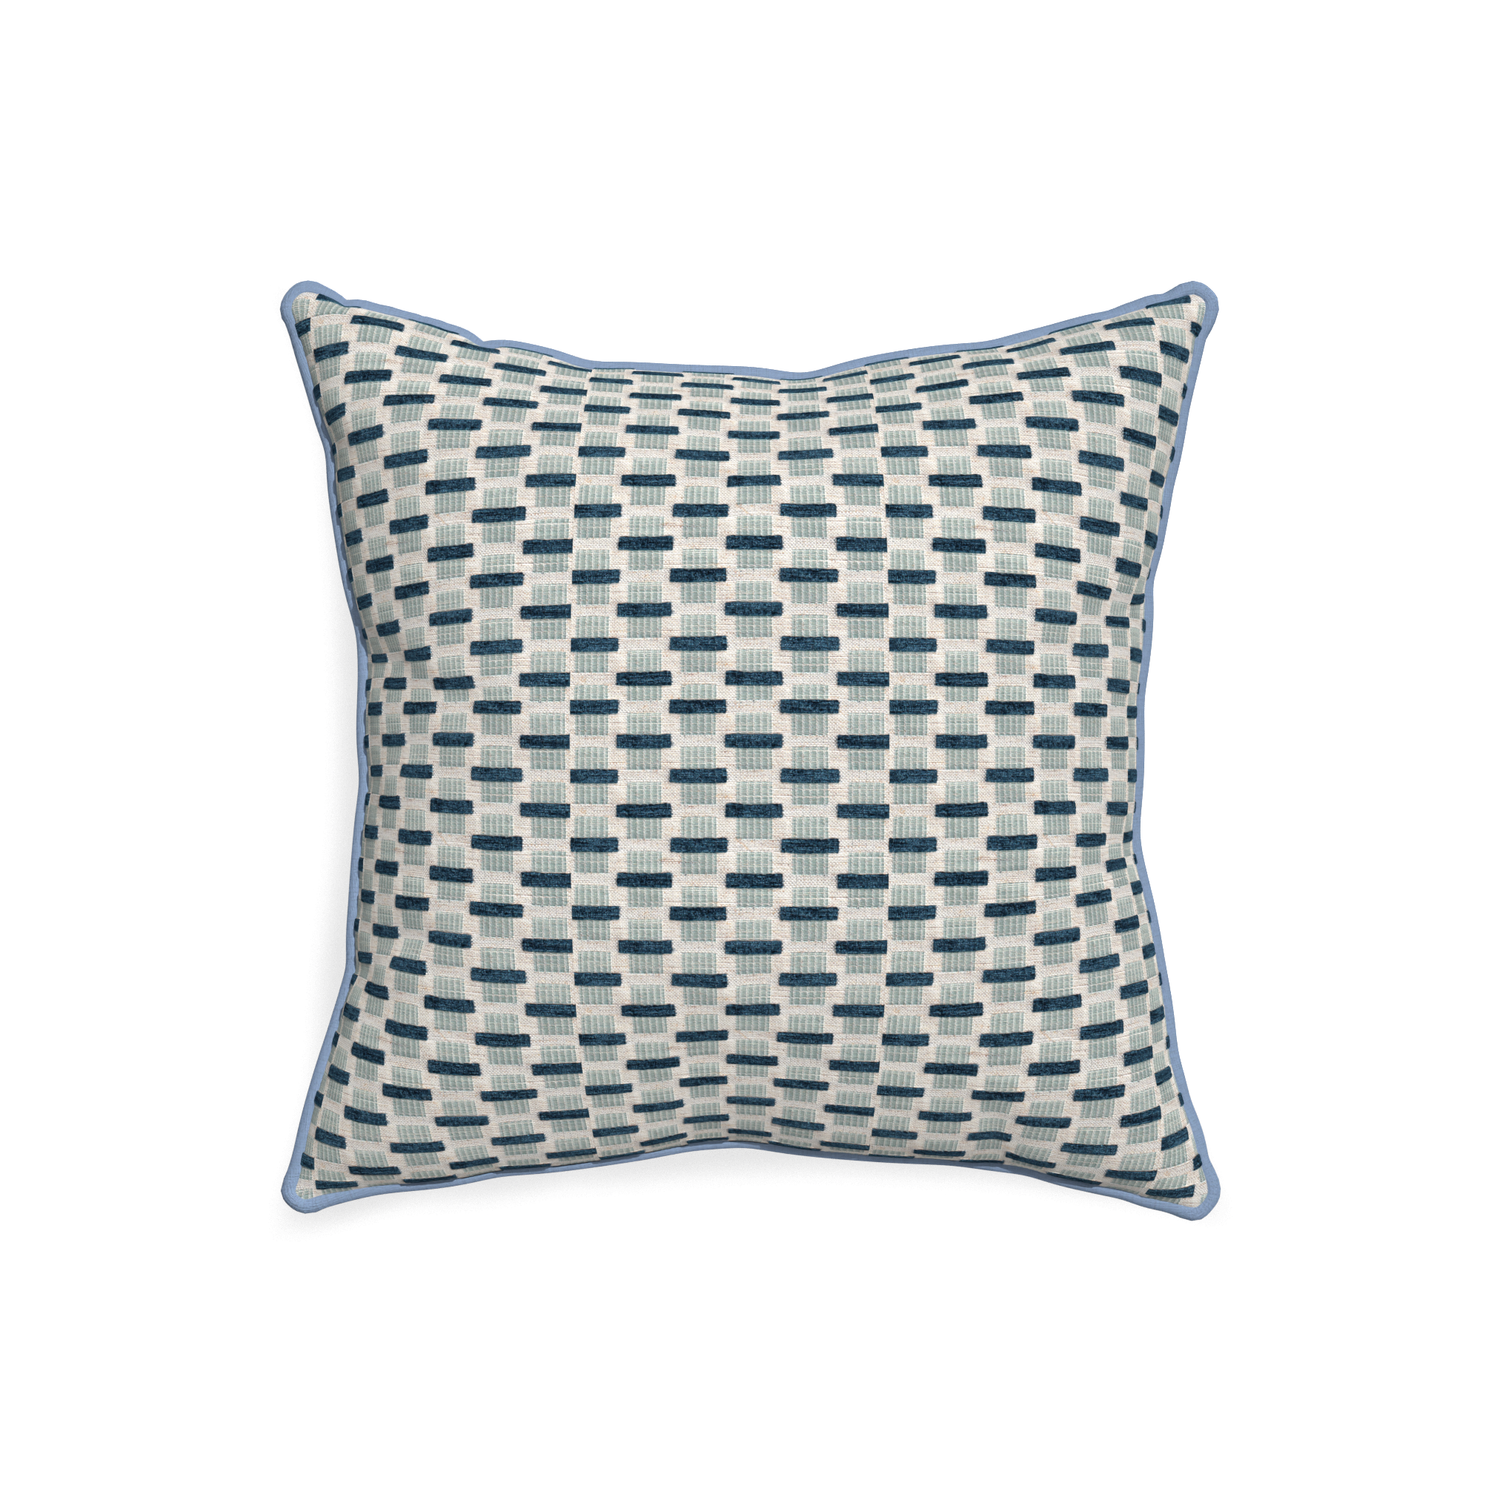 20-square willow amalfi custom blue geometric chenillepillow with sky piping on white background